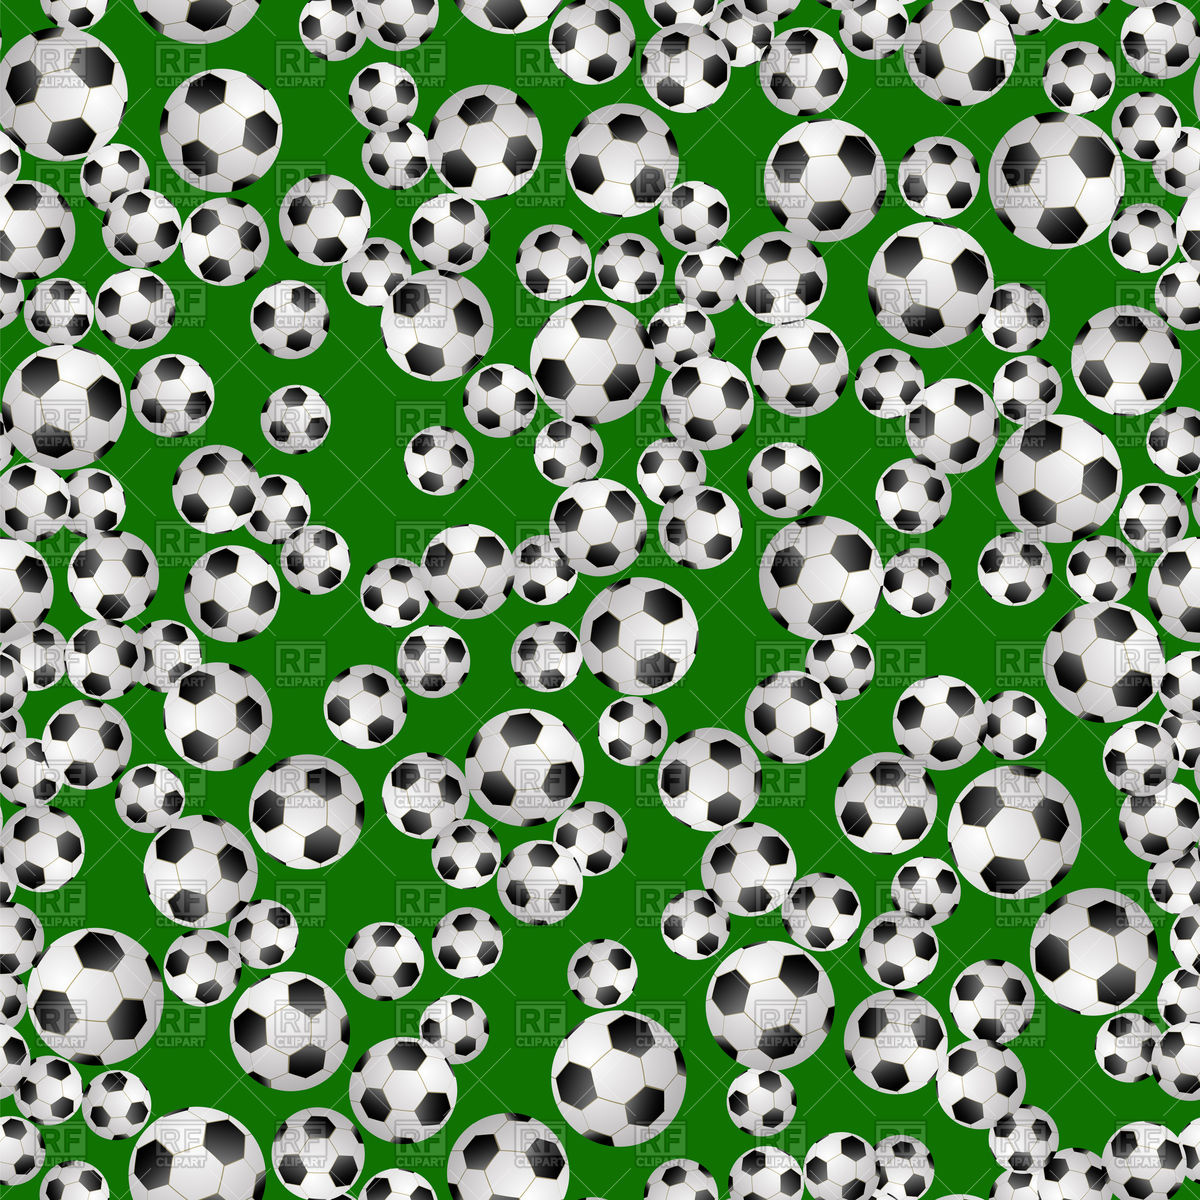 Soccer Ball Seamless Pattern On Green Background Vector Image Of